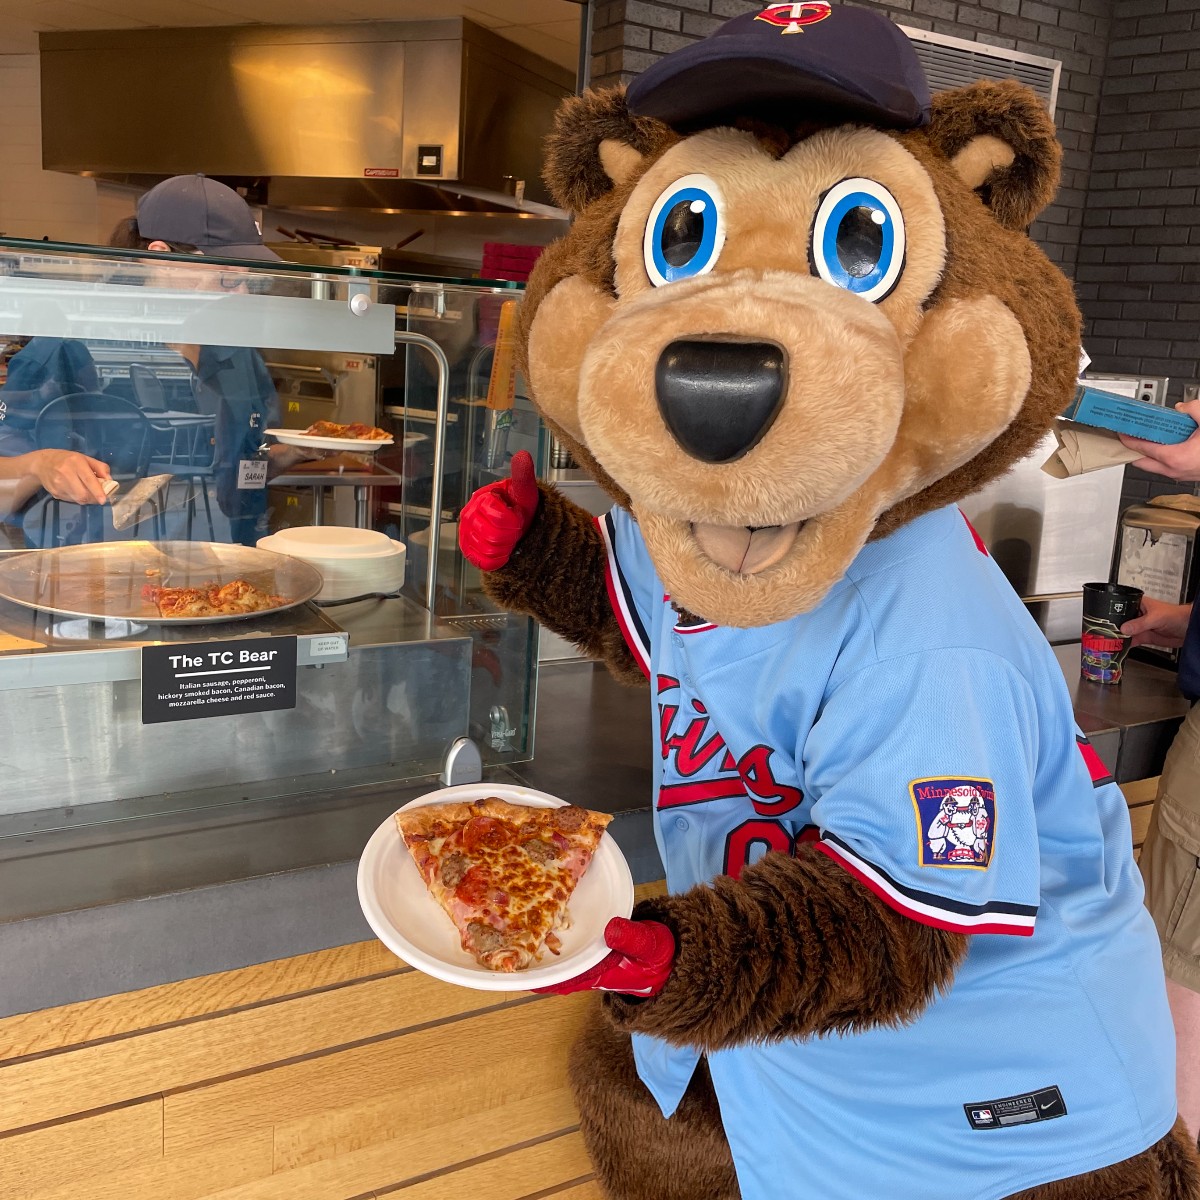 Heading to cheer on the Twins? Don't strike out on flavor! Swing by the Pizza Lucé stand for a slice! #TwinsGame #PizzaLucé #GameDayEats 🍕⚾️